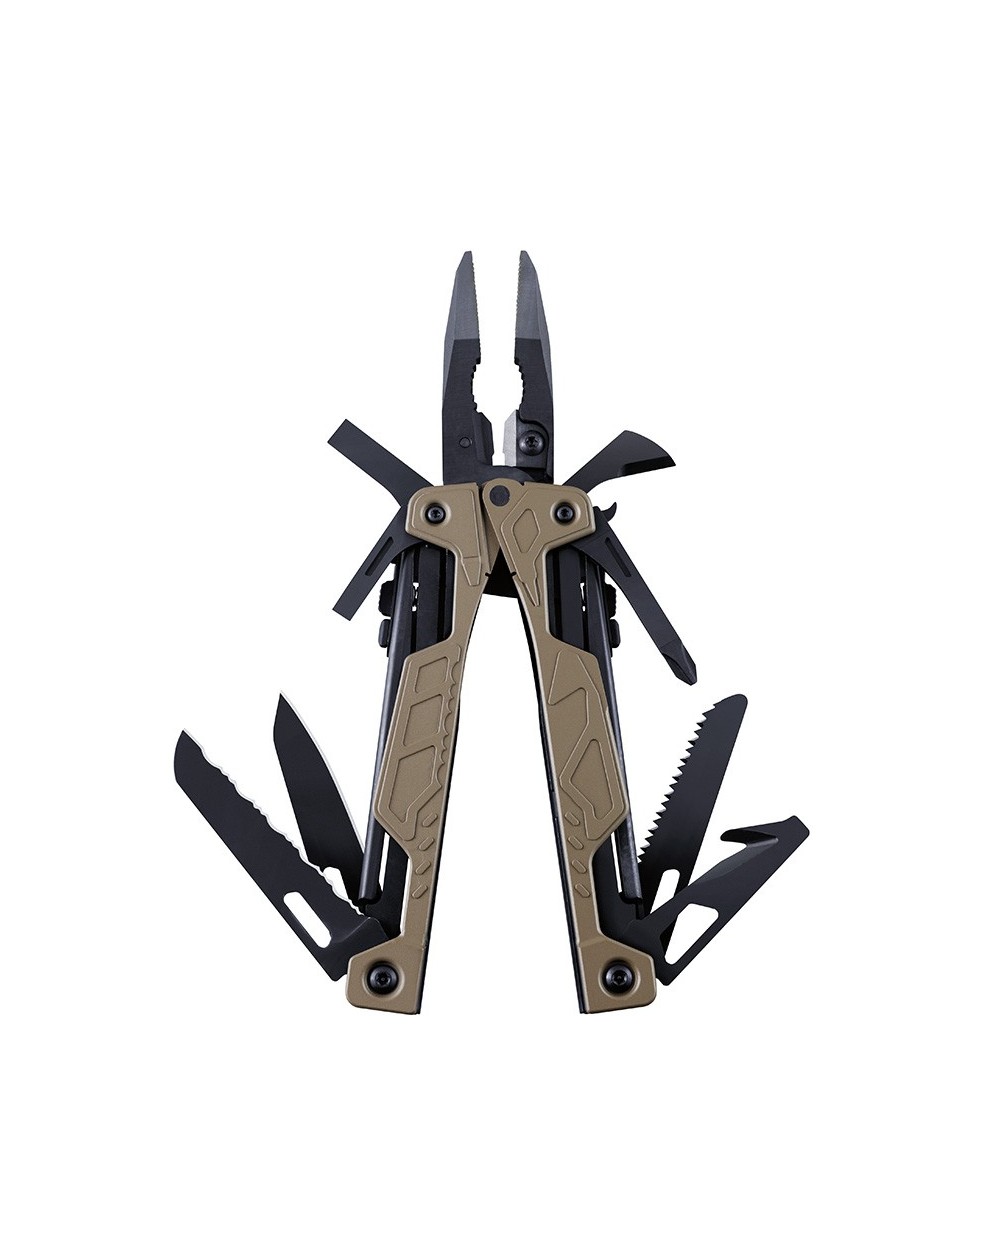 leatherman-pince-multifonctions-oht-coyote-boite-831640-1